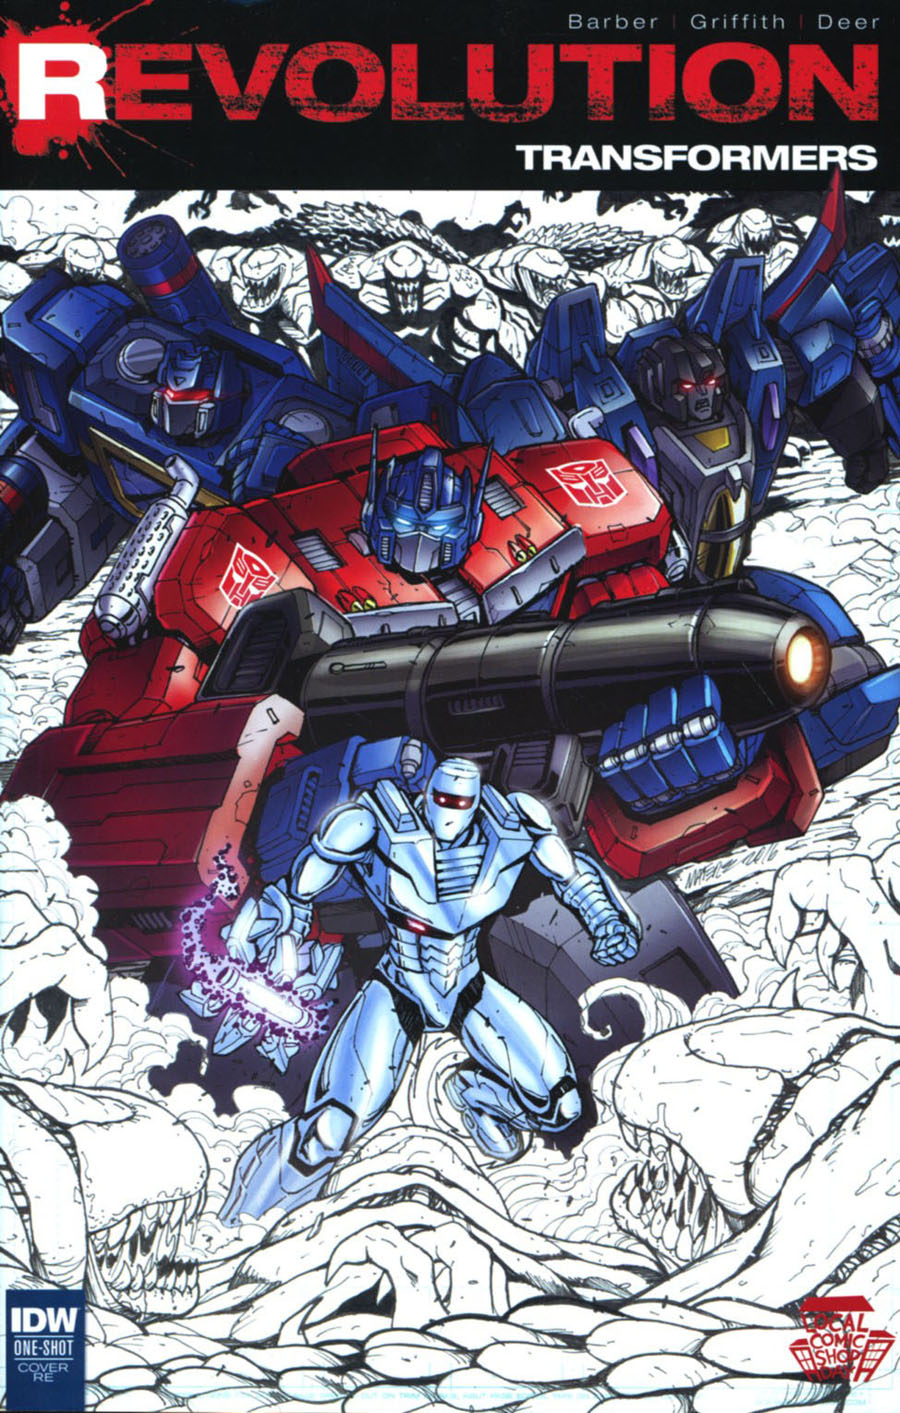 LCSD 2016 Transformers Revolution #1 Variant Marcelo Matere Cover